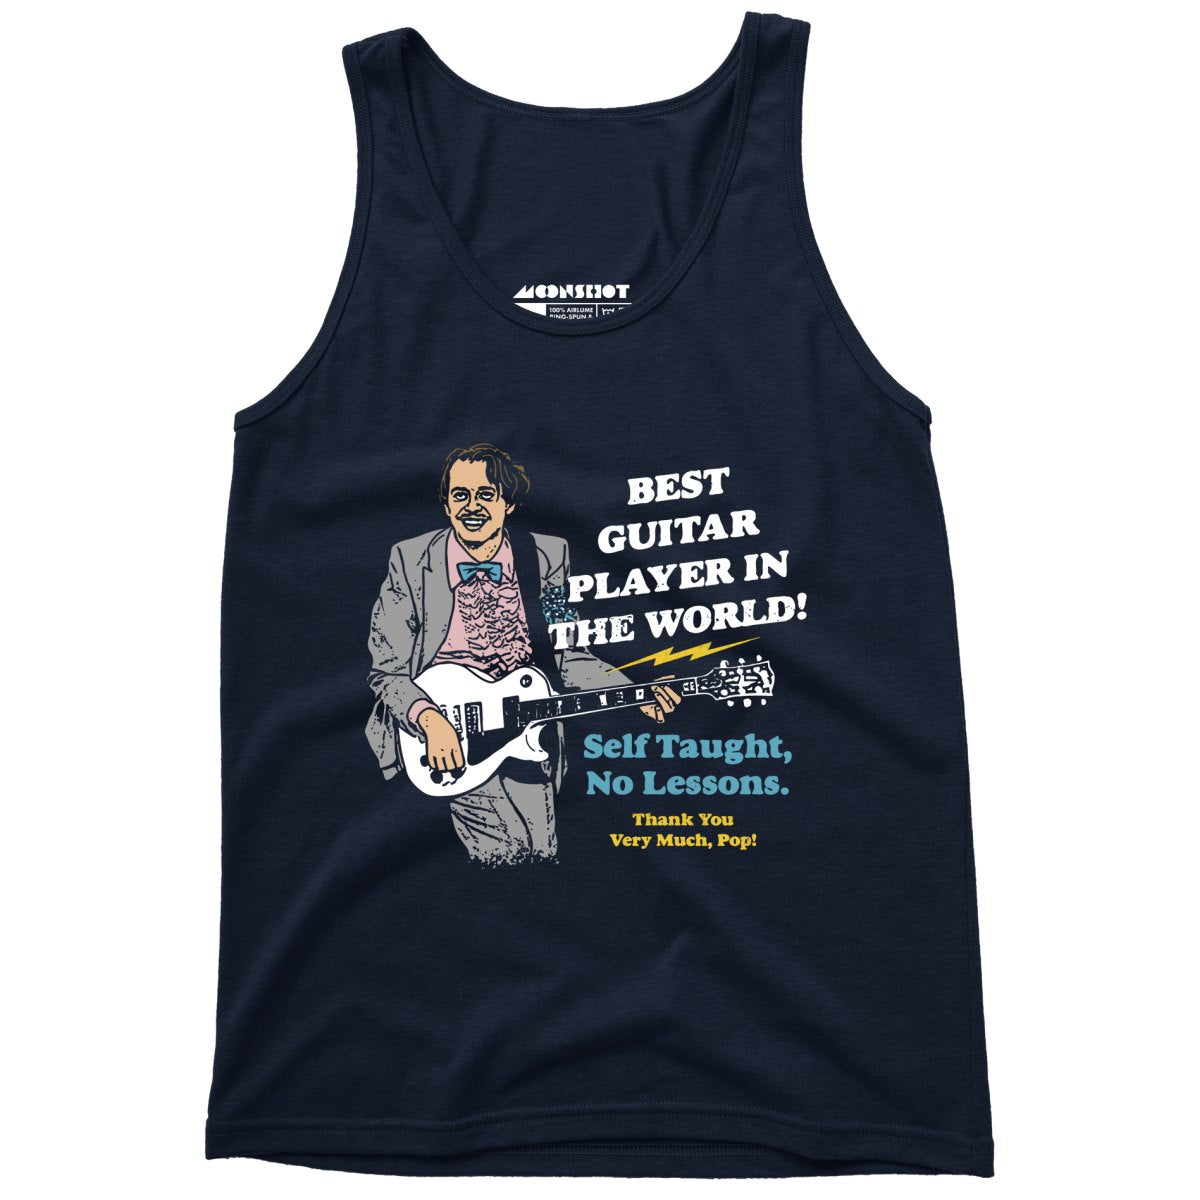 Best Guitar Player in The World! - Unisex Tank Top